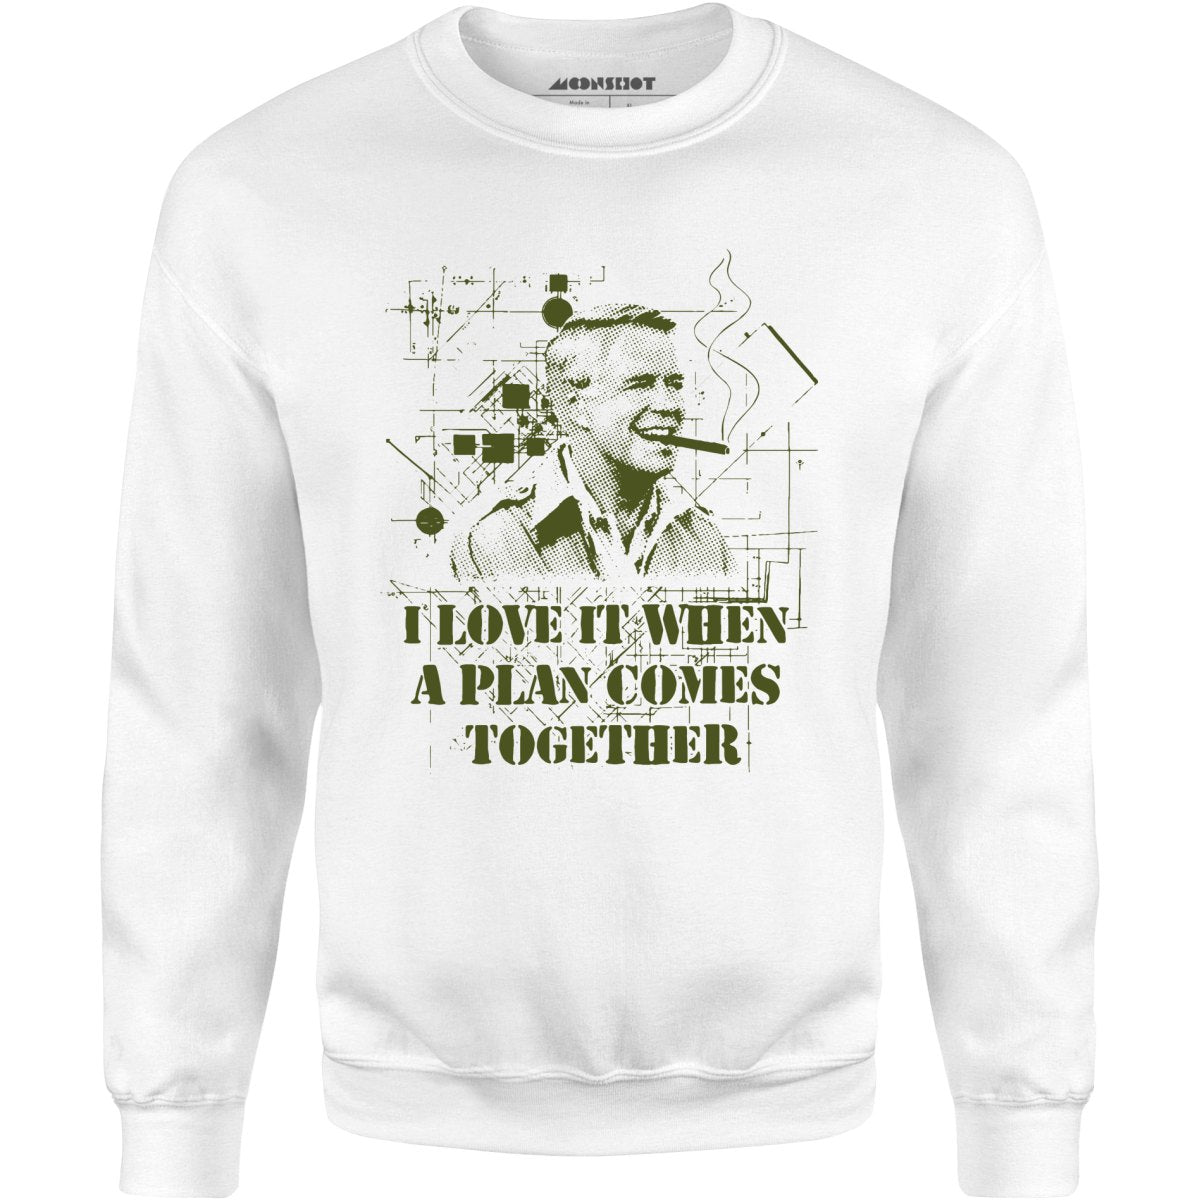 I Love it When a Plan Comes Together - Unisex Sweatshirt